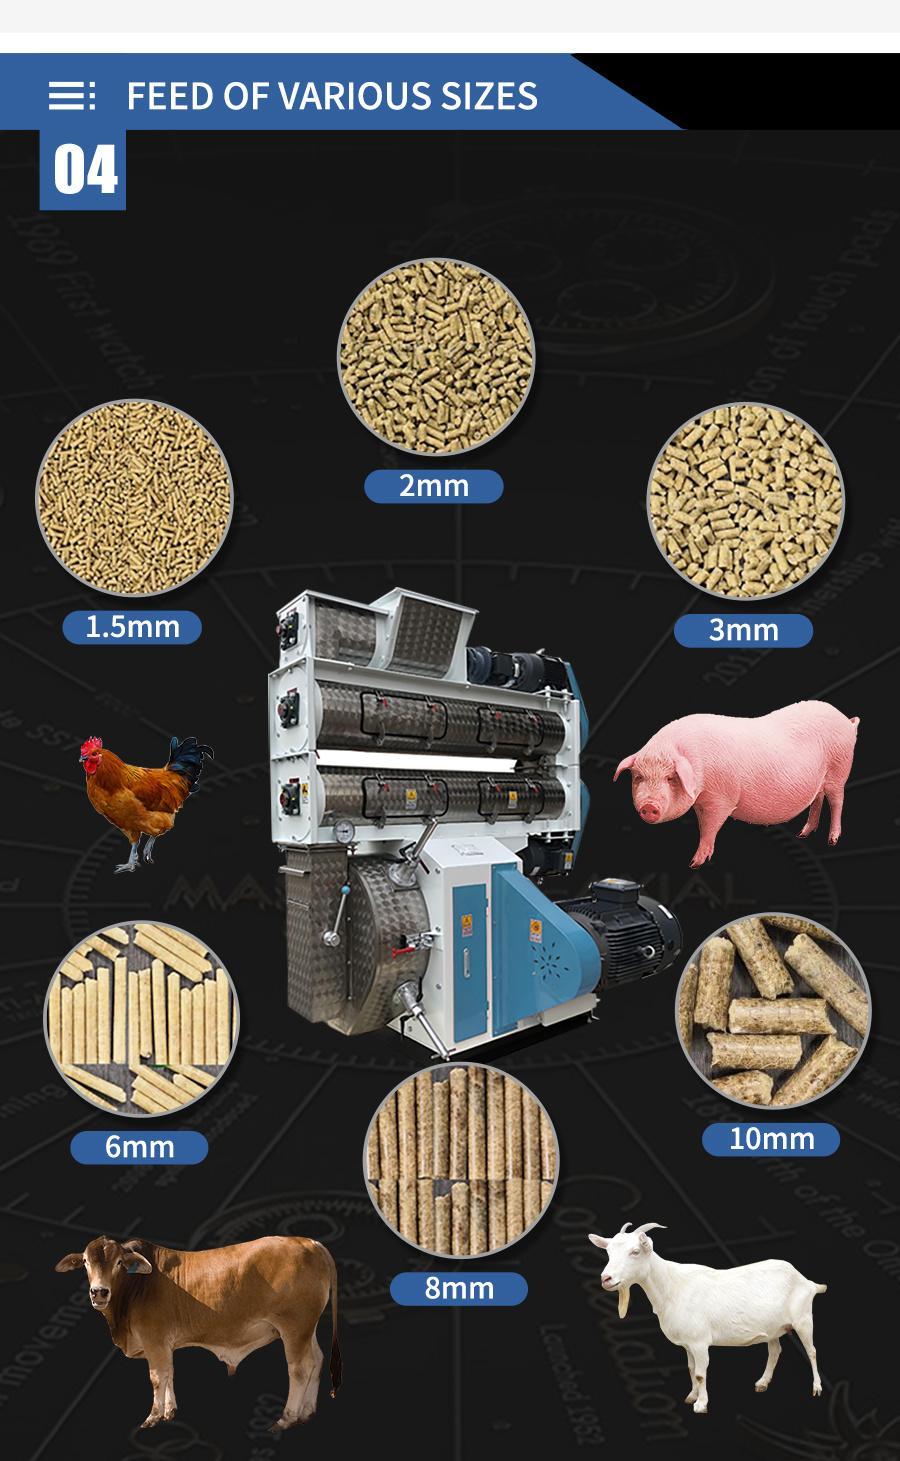 Automatic 3-5tph Animal Feed Machine for Poultry Chicken Pig Pet Cattle Sheep Including Feed Pellet Machine as Granuator, Grinding Machine, etc